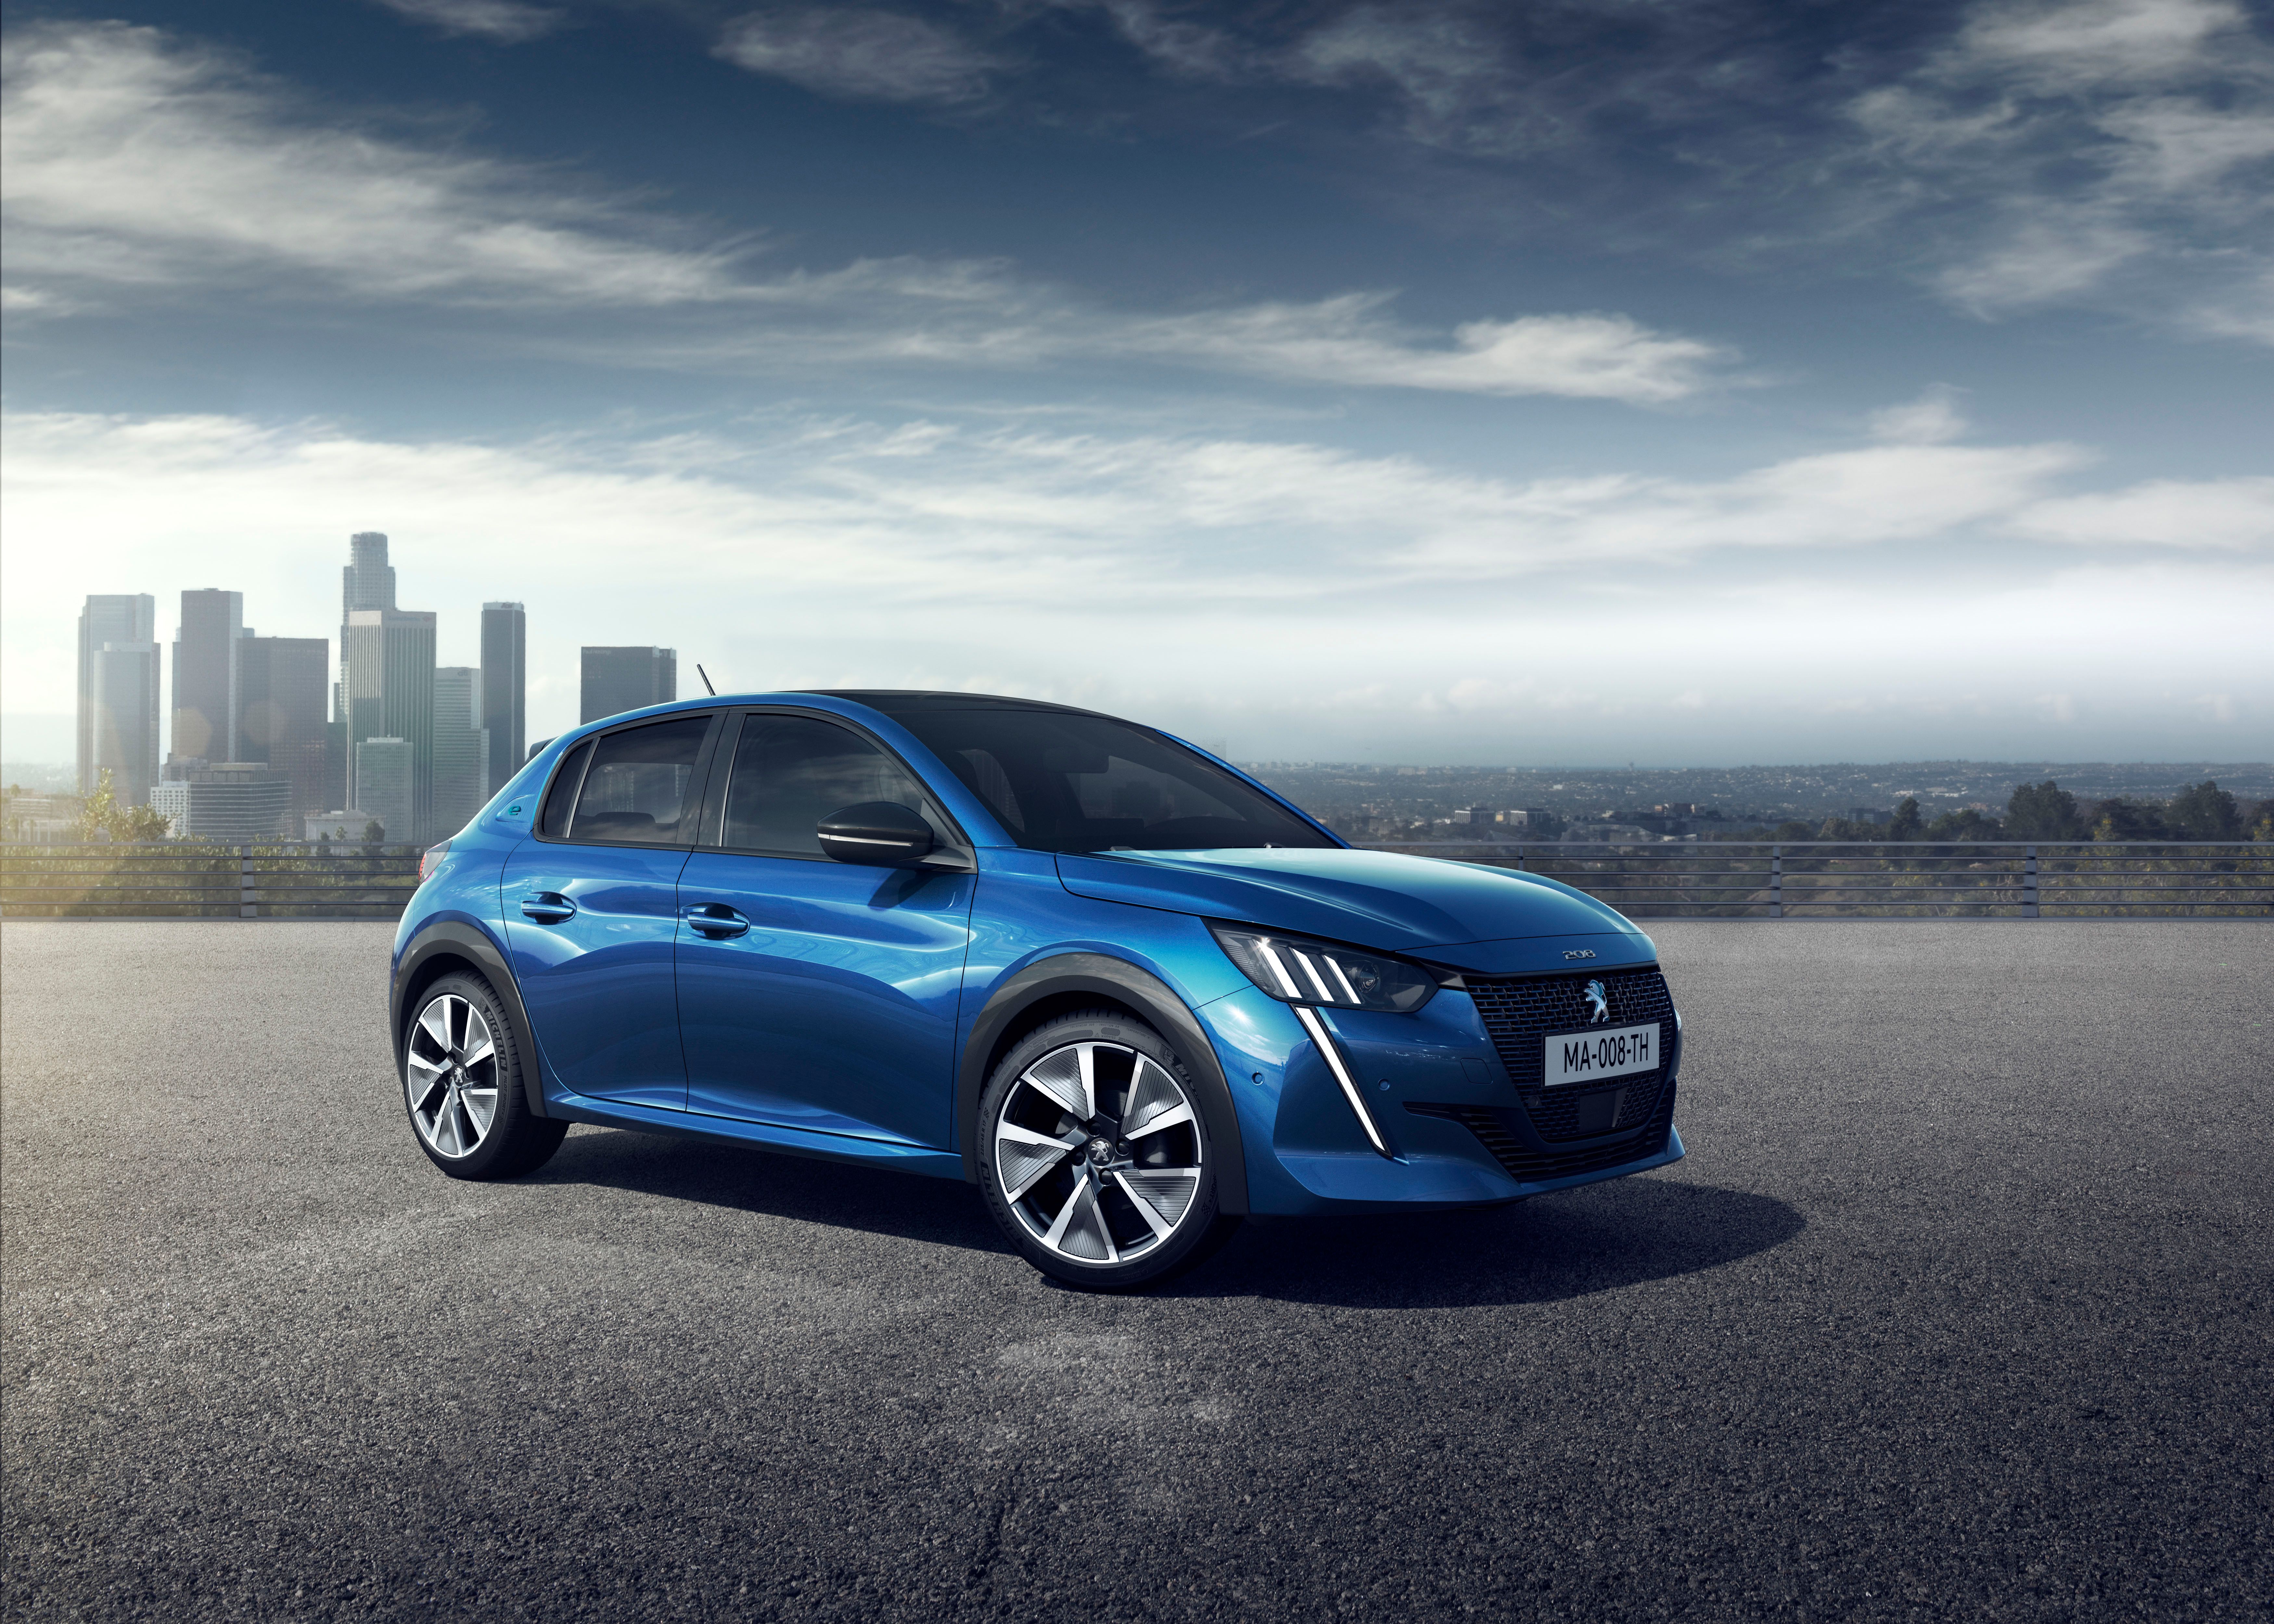 1988 - 1999 Wallpaper of the Day: 2019 Peugeot 208